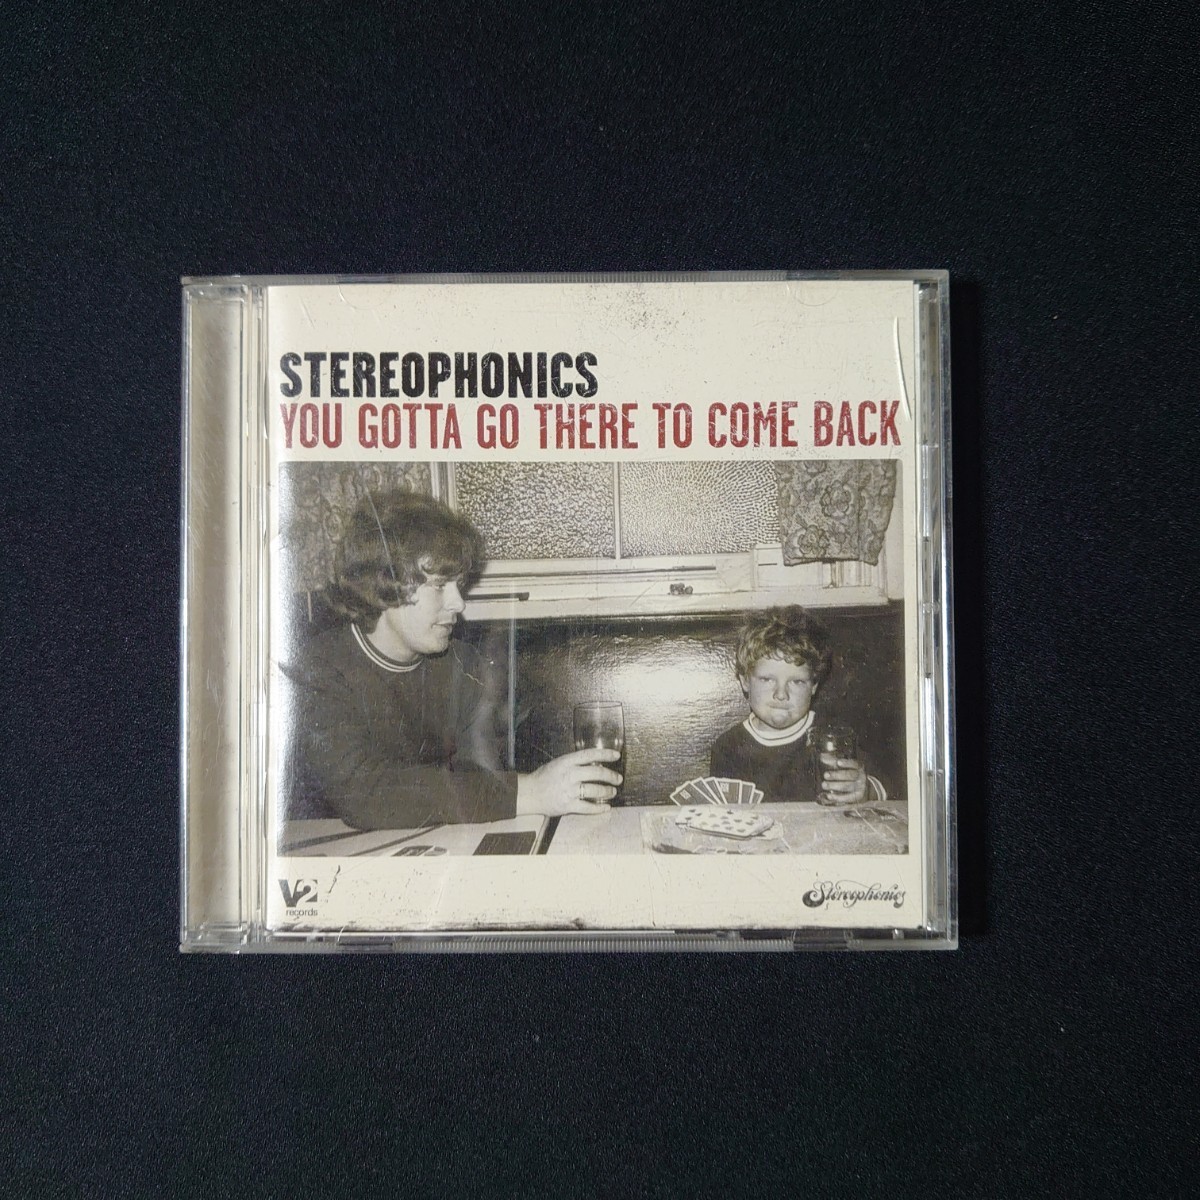 Stereophonics『You Gotta Go There To Come Back』ステレオフォニックス/CD/#YECD69_画像1